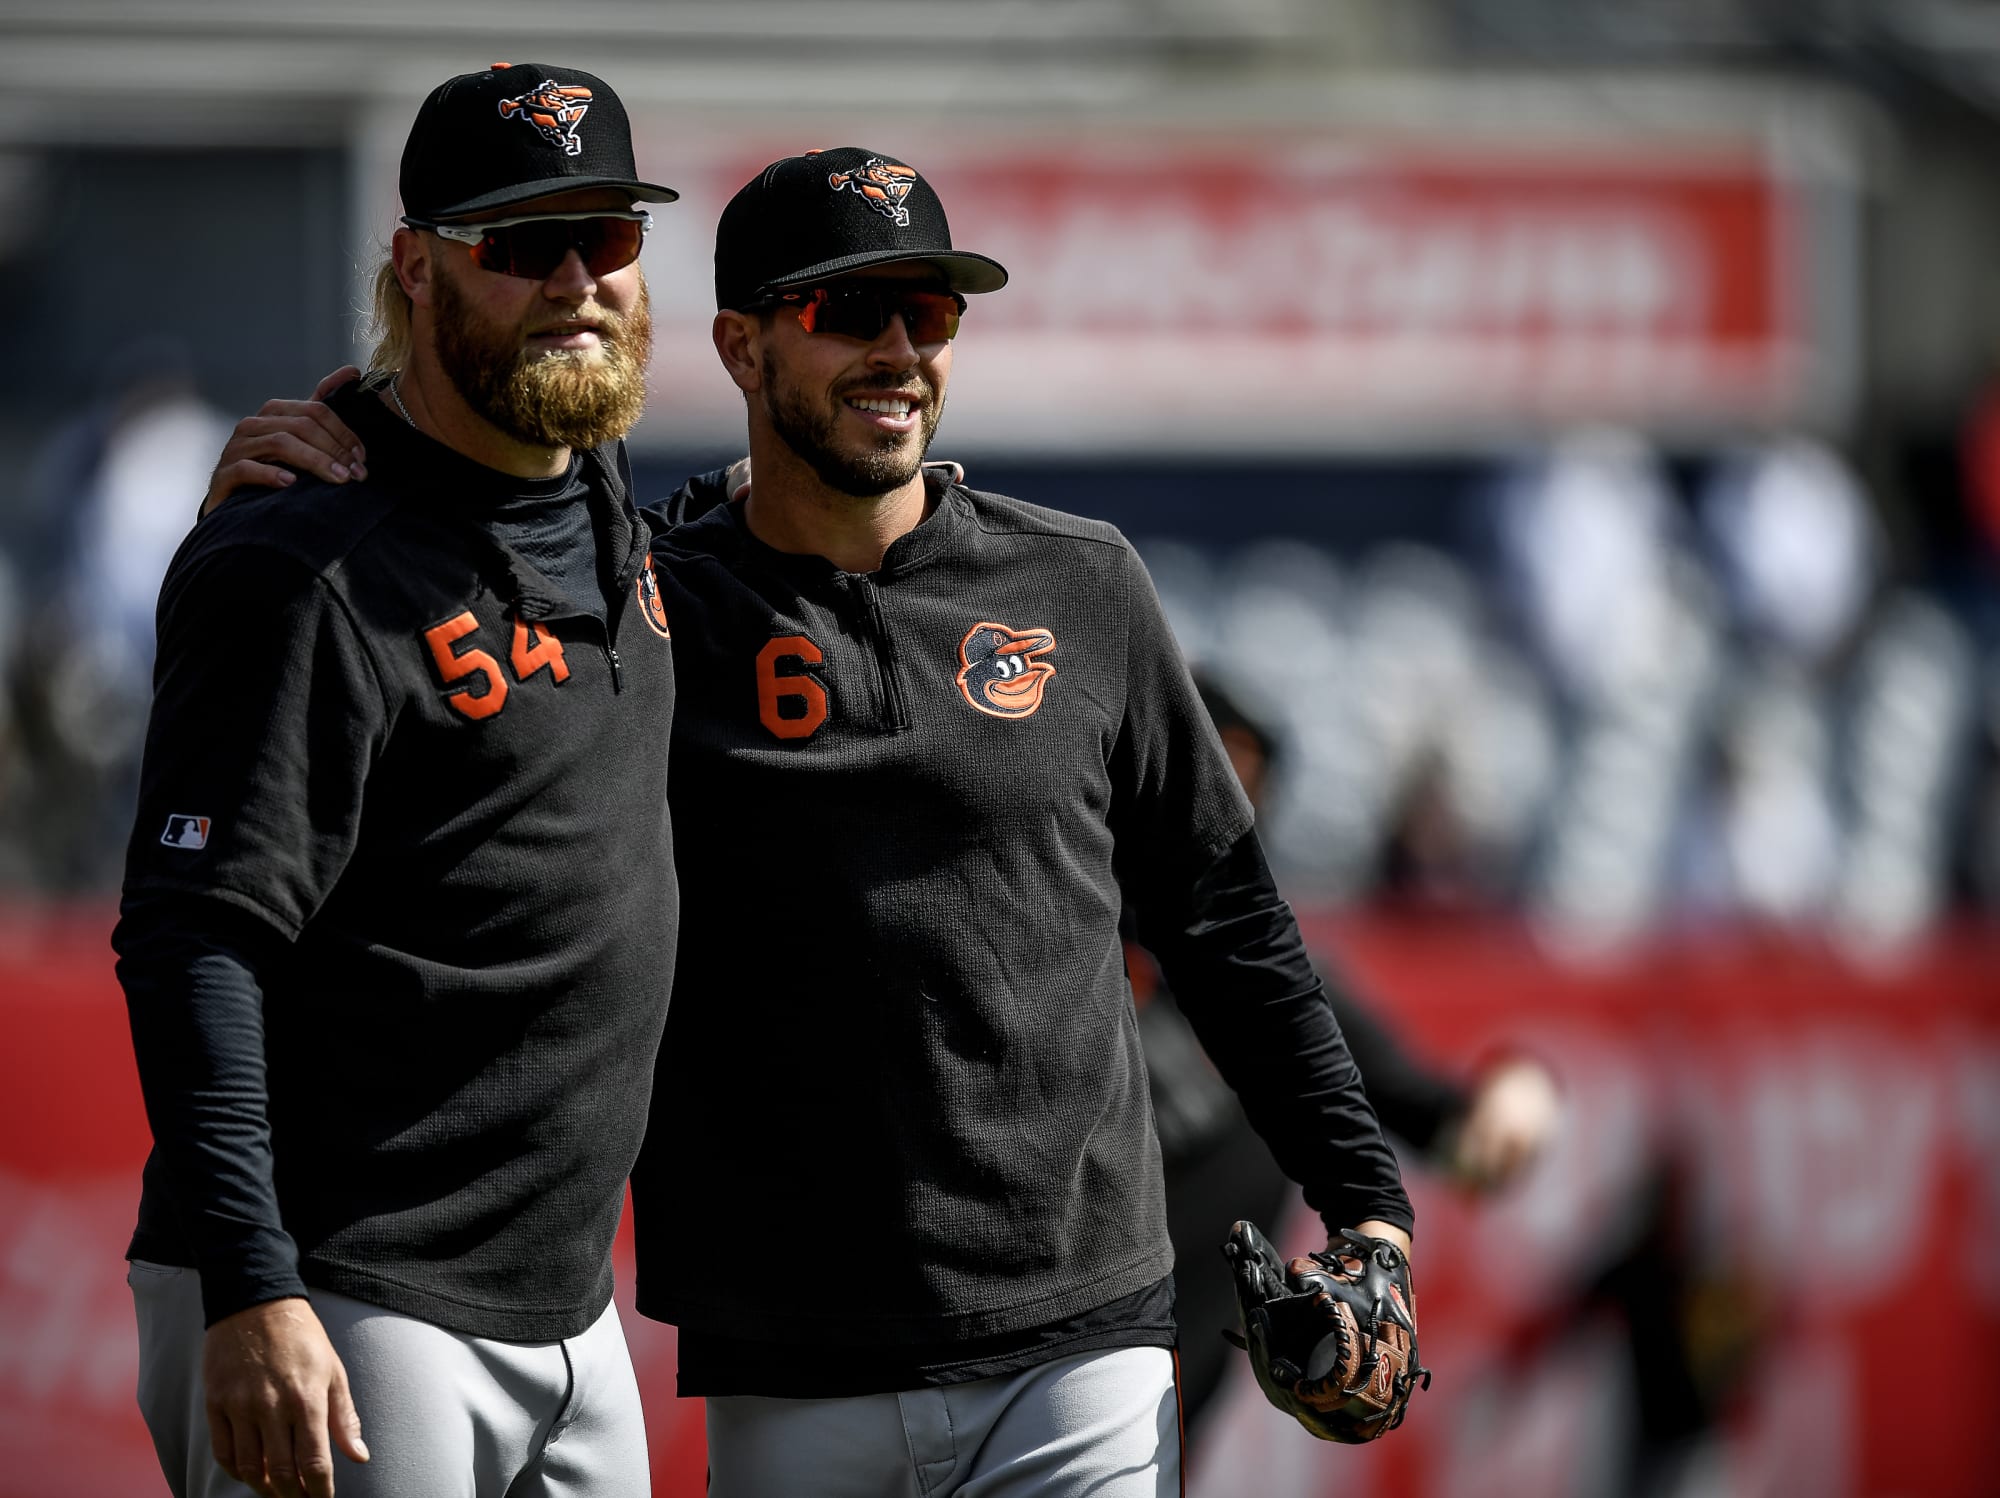 Baltimore Orioles What Happened To The Opening Day Lineup?